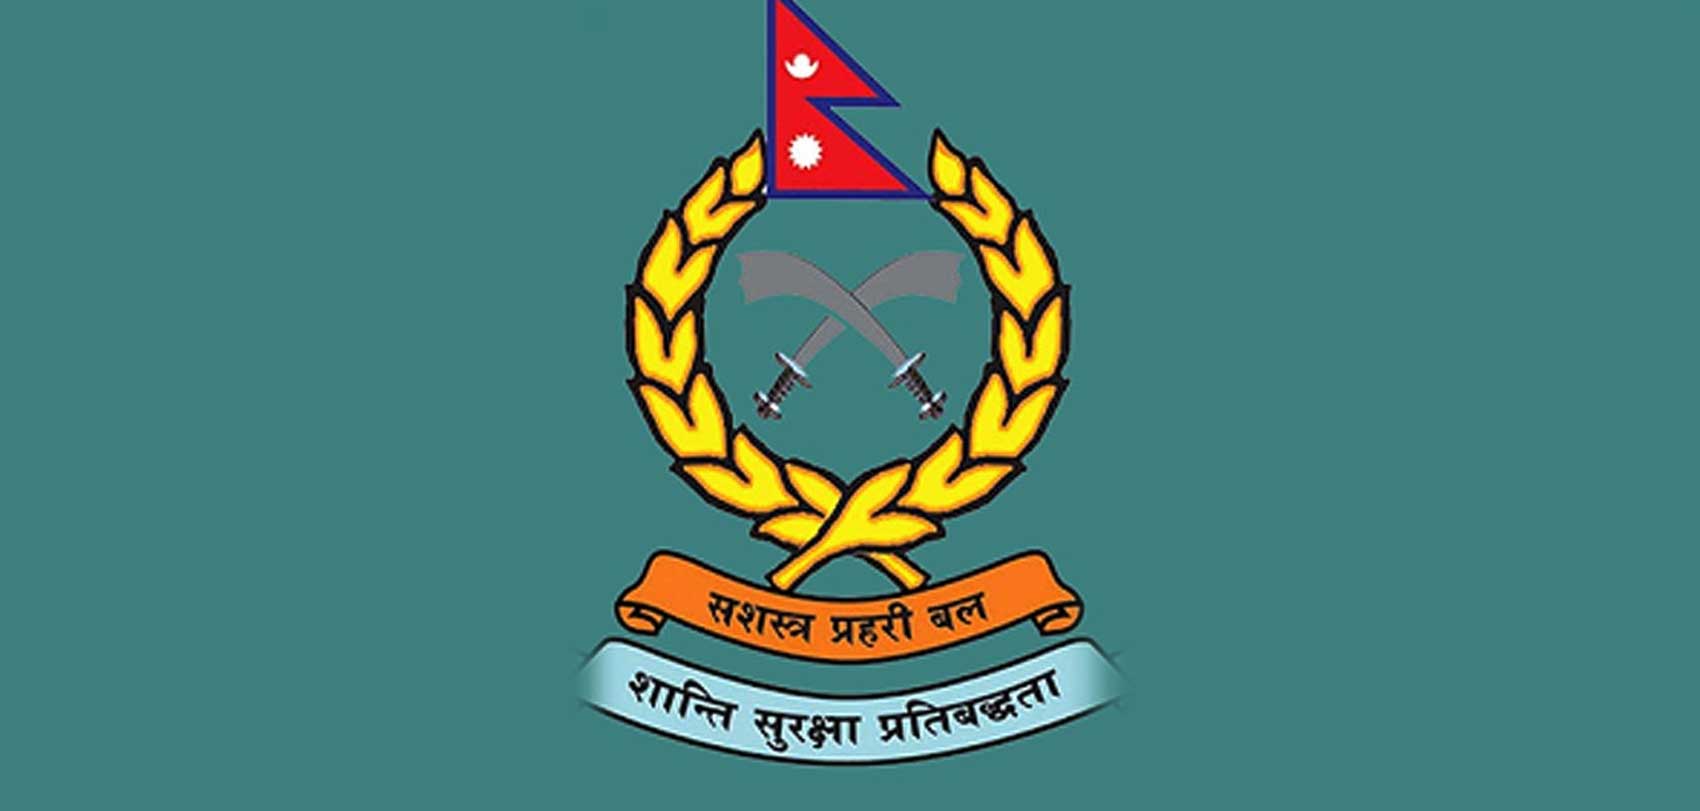 APF invites applications for 48 inspector posts (with information)